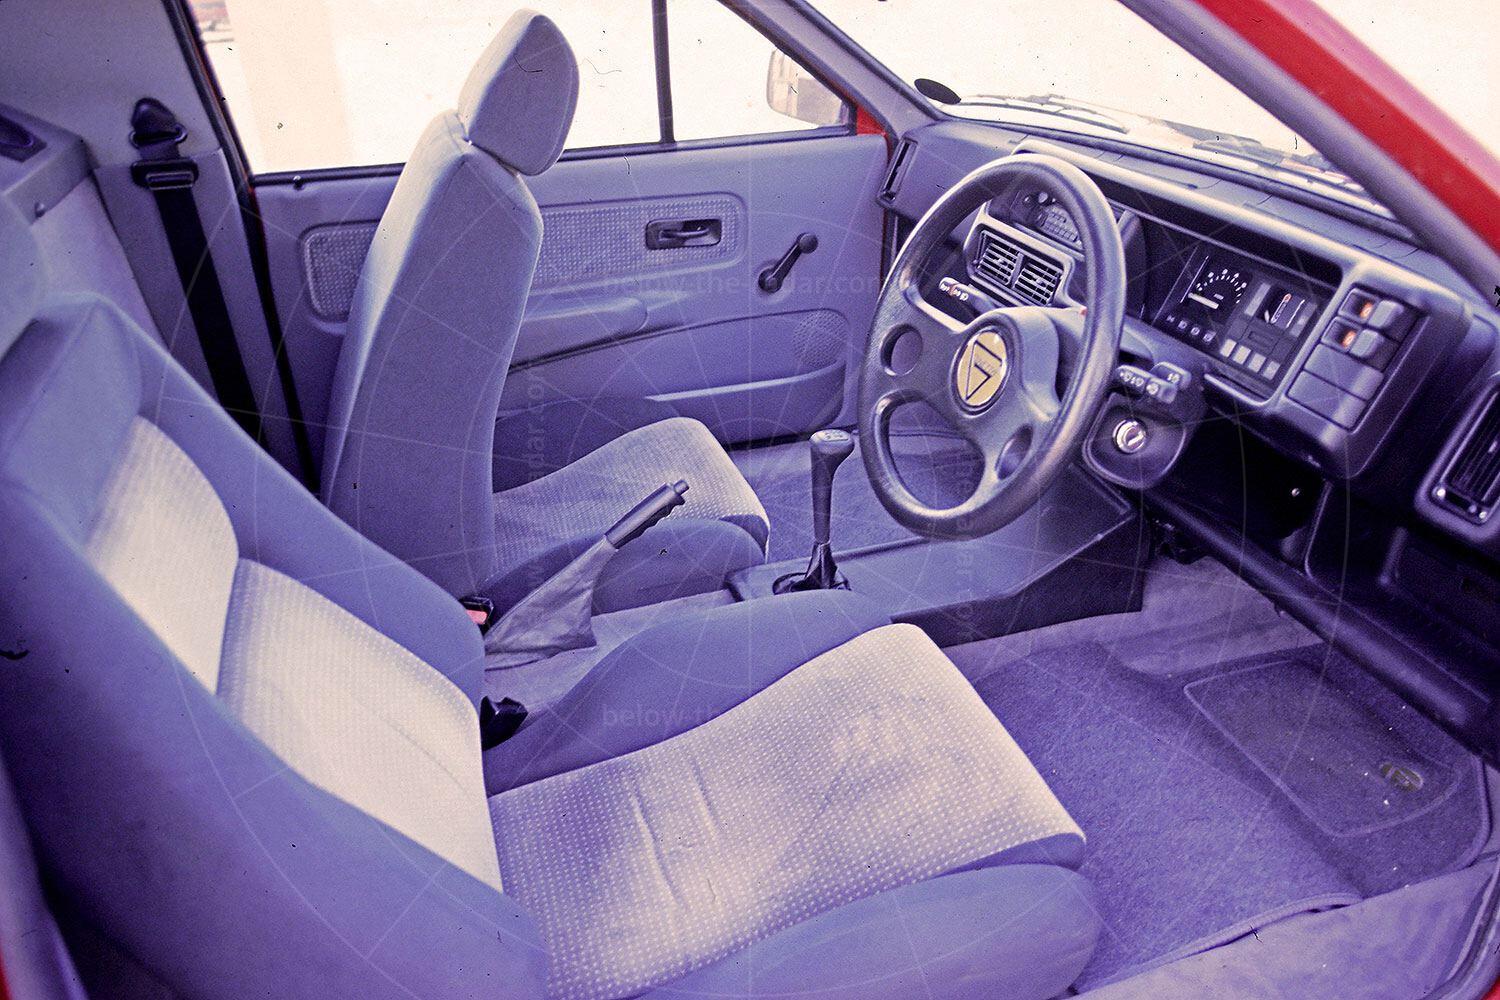 The interior of the Auto Express G32 test car Pic: magiccarpics.co.uk | The interior of the Auto Express G32 test car